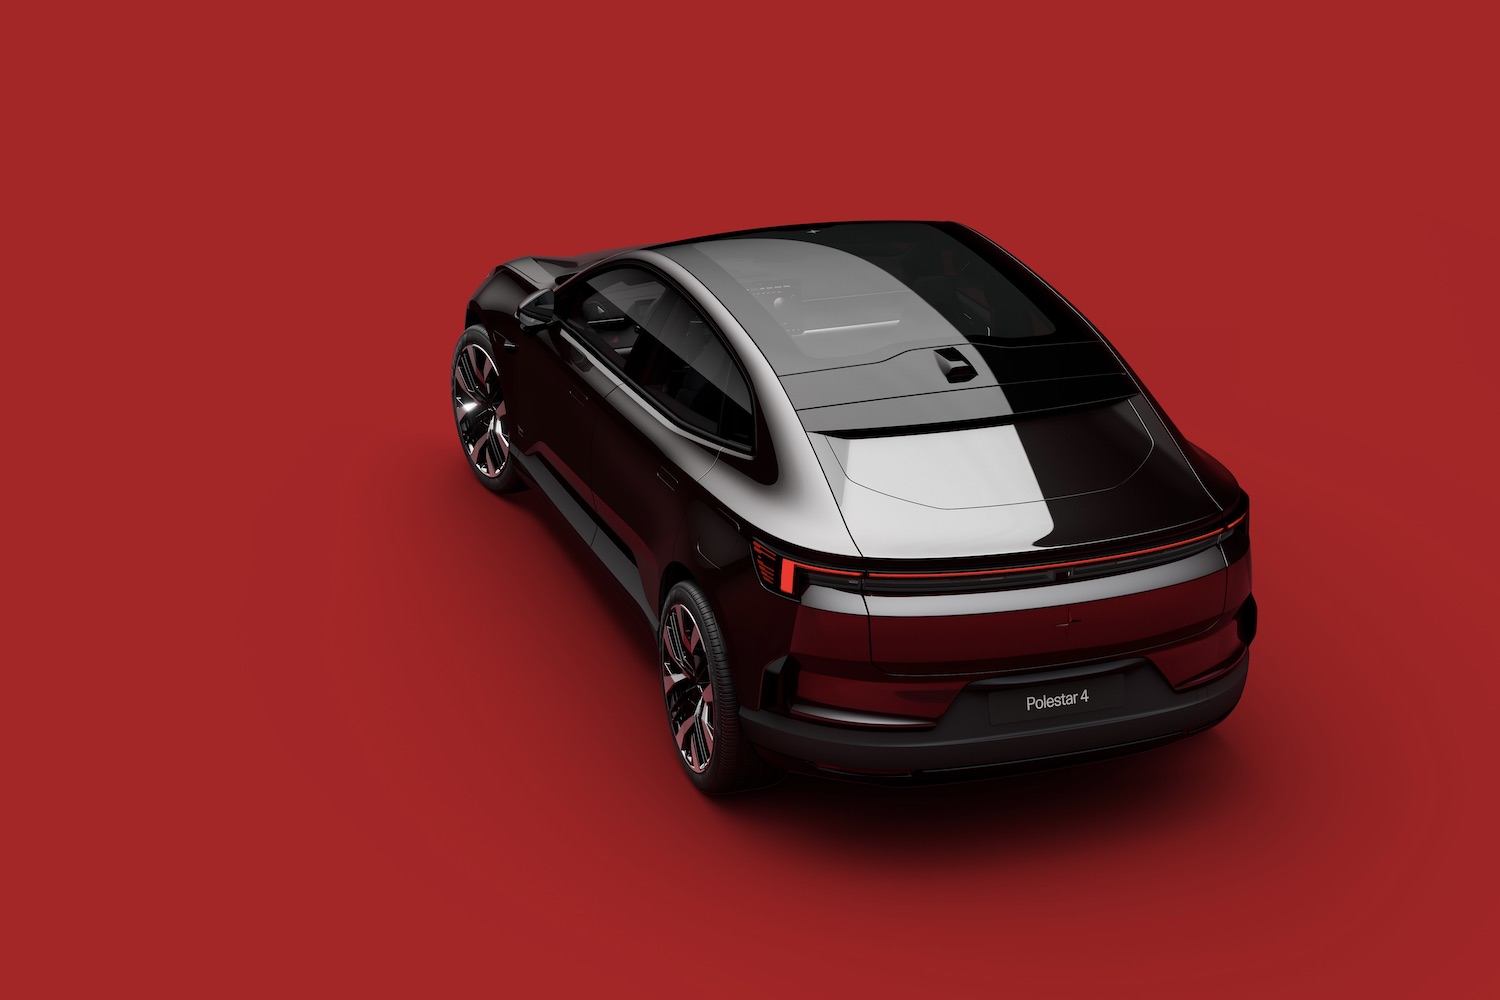 Rear end angle of the 2025 Polestar 4 from overhead in front of a red background.